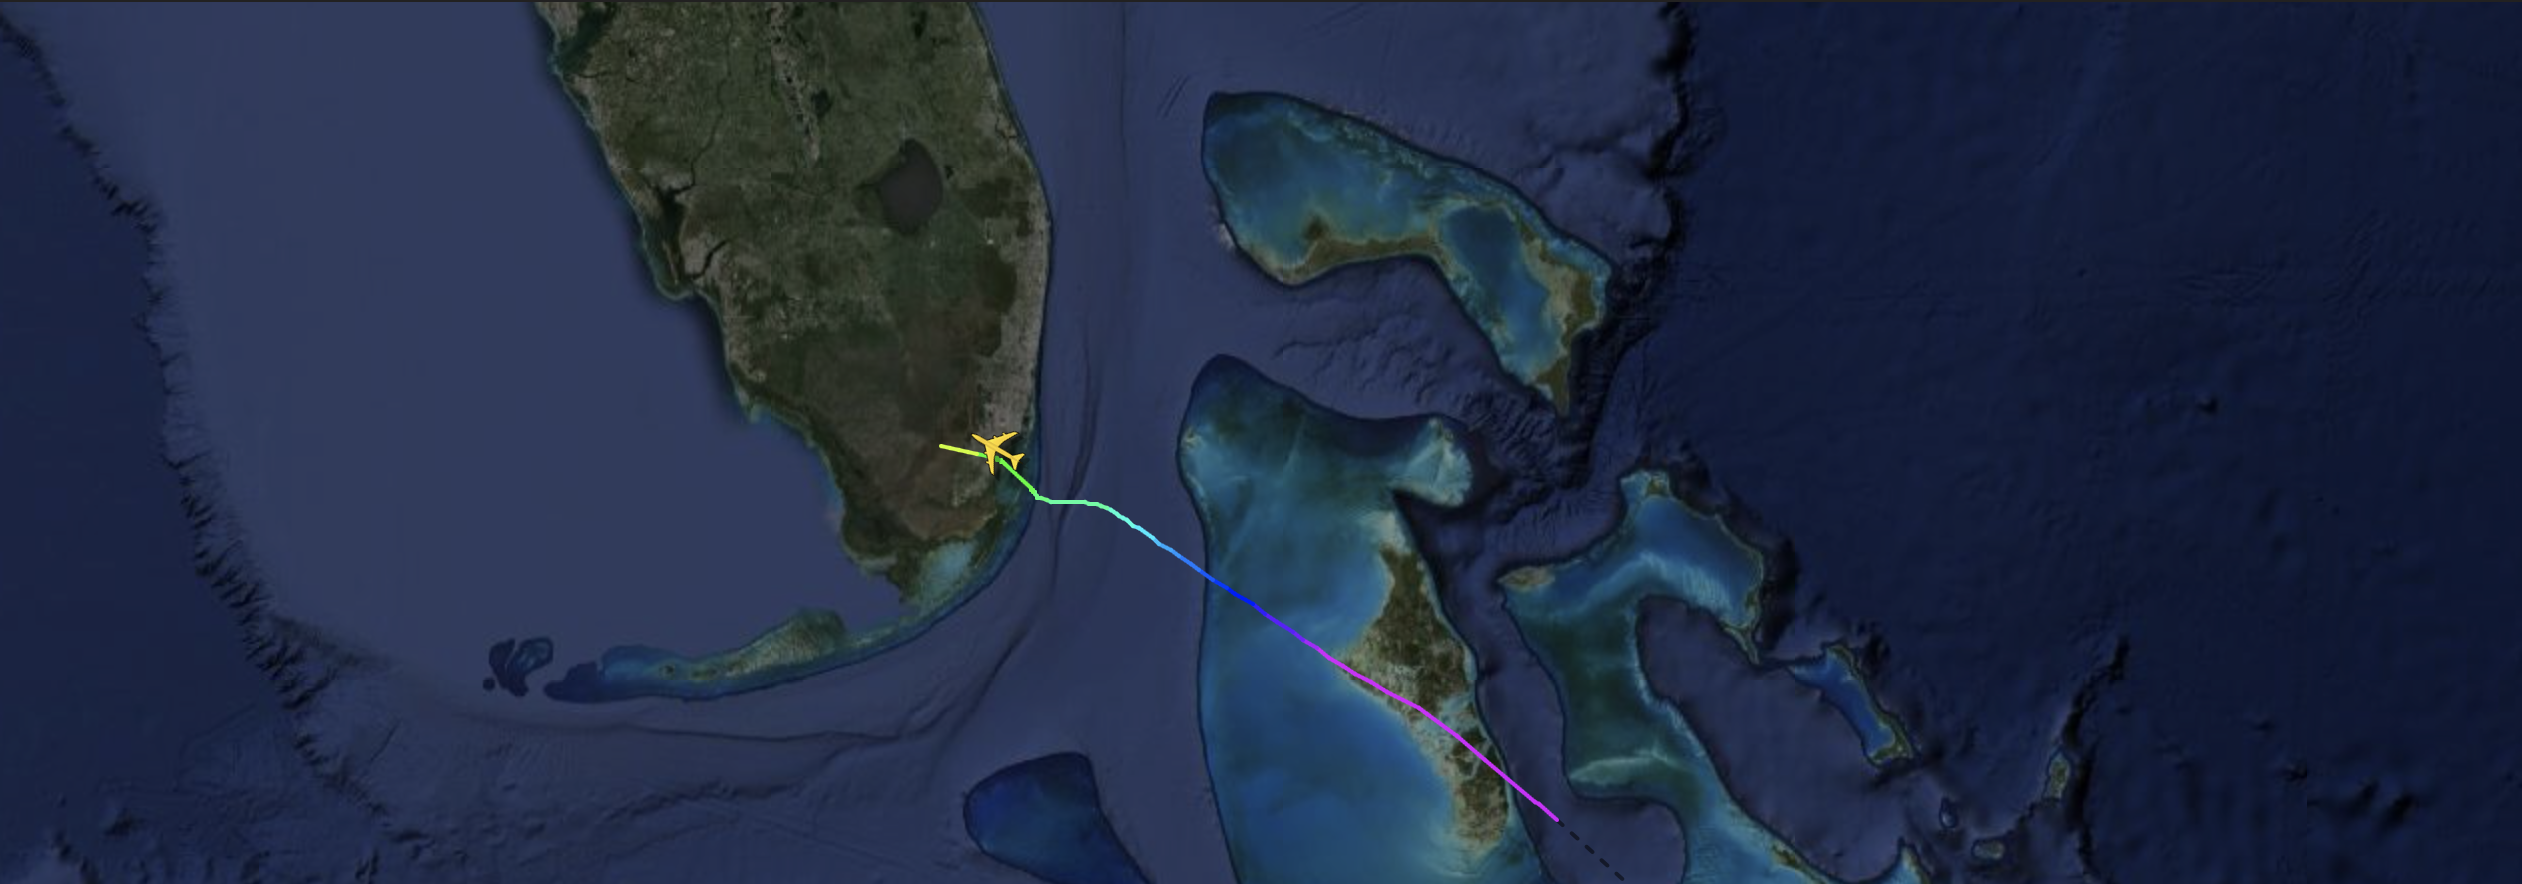 The reclaimed Boeing 747 returning to the United States of America using callsign TYCON23. Source: FlightRadar24.com